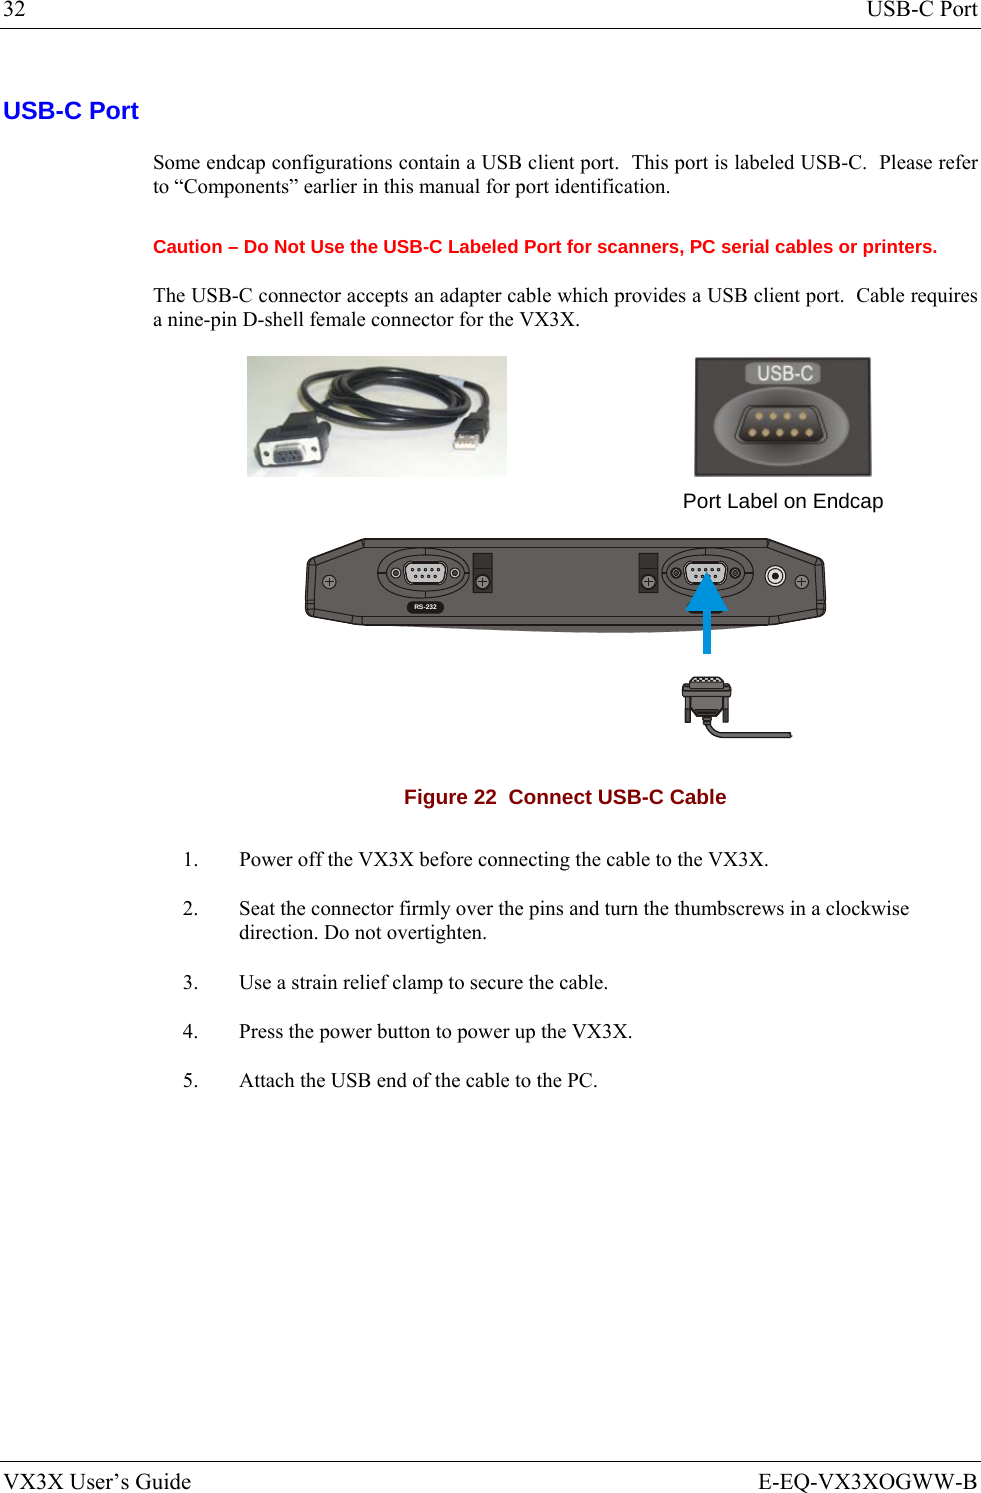 32  USB-C Port VX3X User’s Guide  E-EQ-VX3XOGWW-B USB-C Port Some endcap configurations contain a USB client port.  This port is labeled USB-C.  Please refer to “Components” earlier in this manual for port identification. Caution – Do Not Use the USB-C Labeled Port for scanners, PC serial cables or printers. The USB-C connector accepts an adapter cable which provides a USB client port.  Cable requires a nine-pin D-shell female connector for the VX3X.        Port Label on Endcap  RS-232 USB-C Figure 22  Connect USB-C Cable 1.  Power off the VX3X before connecting the cable to the VX3X. 2.  Seat the connector firmly over the pins and turn the thumbscrews in a clockwise direction. Do not overtighten. 3.  Use a strain relief clamp to secure the cable. 4.  Press the power button to power up the VX3X. 5.  Attach the USB end of the cable to the PC. 